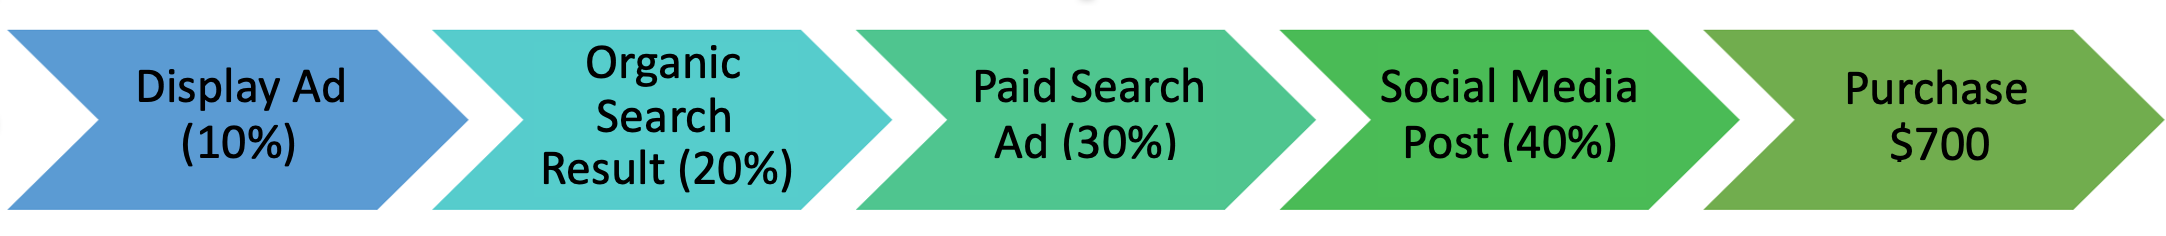 display ad 10%, organic search result 20%, paid search ad 30%, social media post 40%, purchase $700